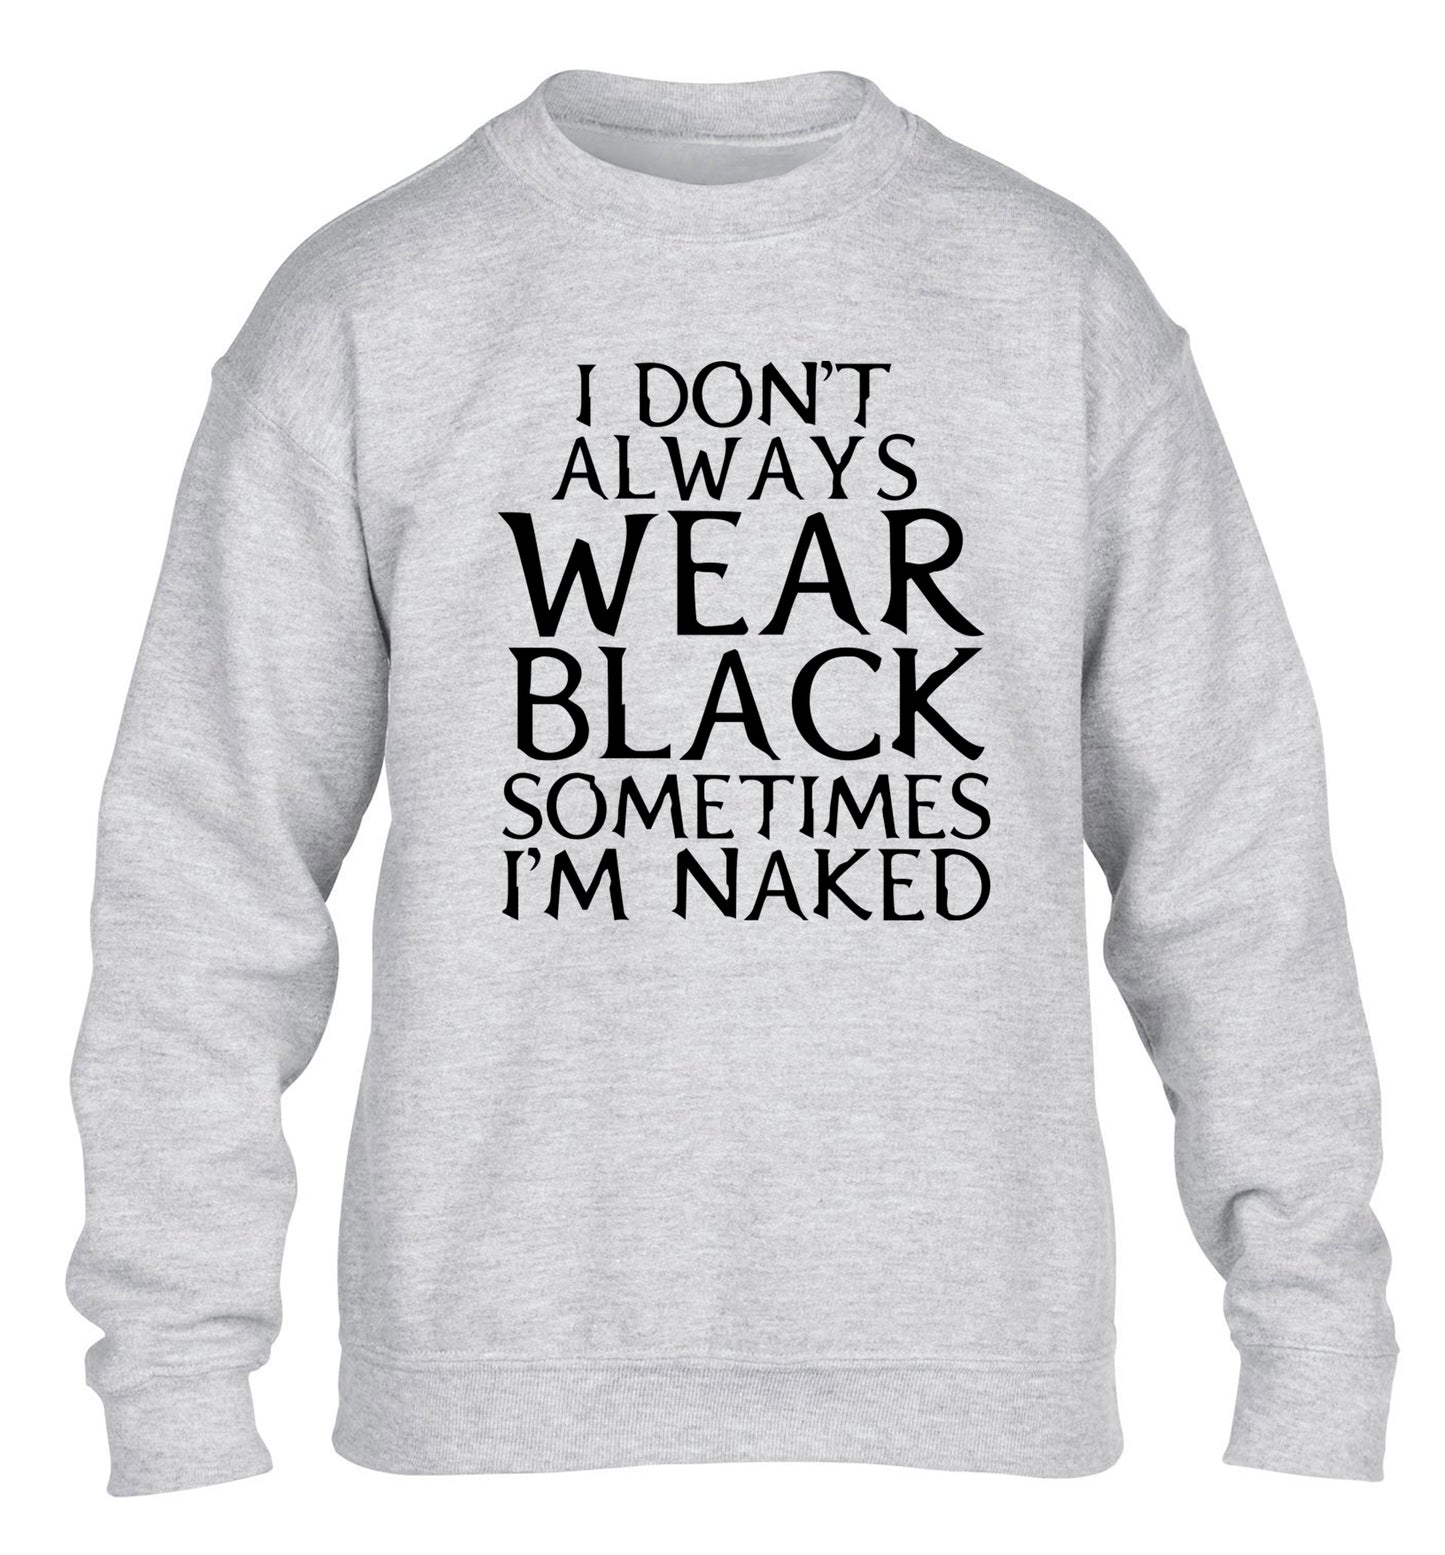 I don't always wear black sometimes I'm naked children's grey sweater 12-13 Years